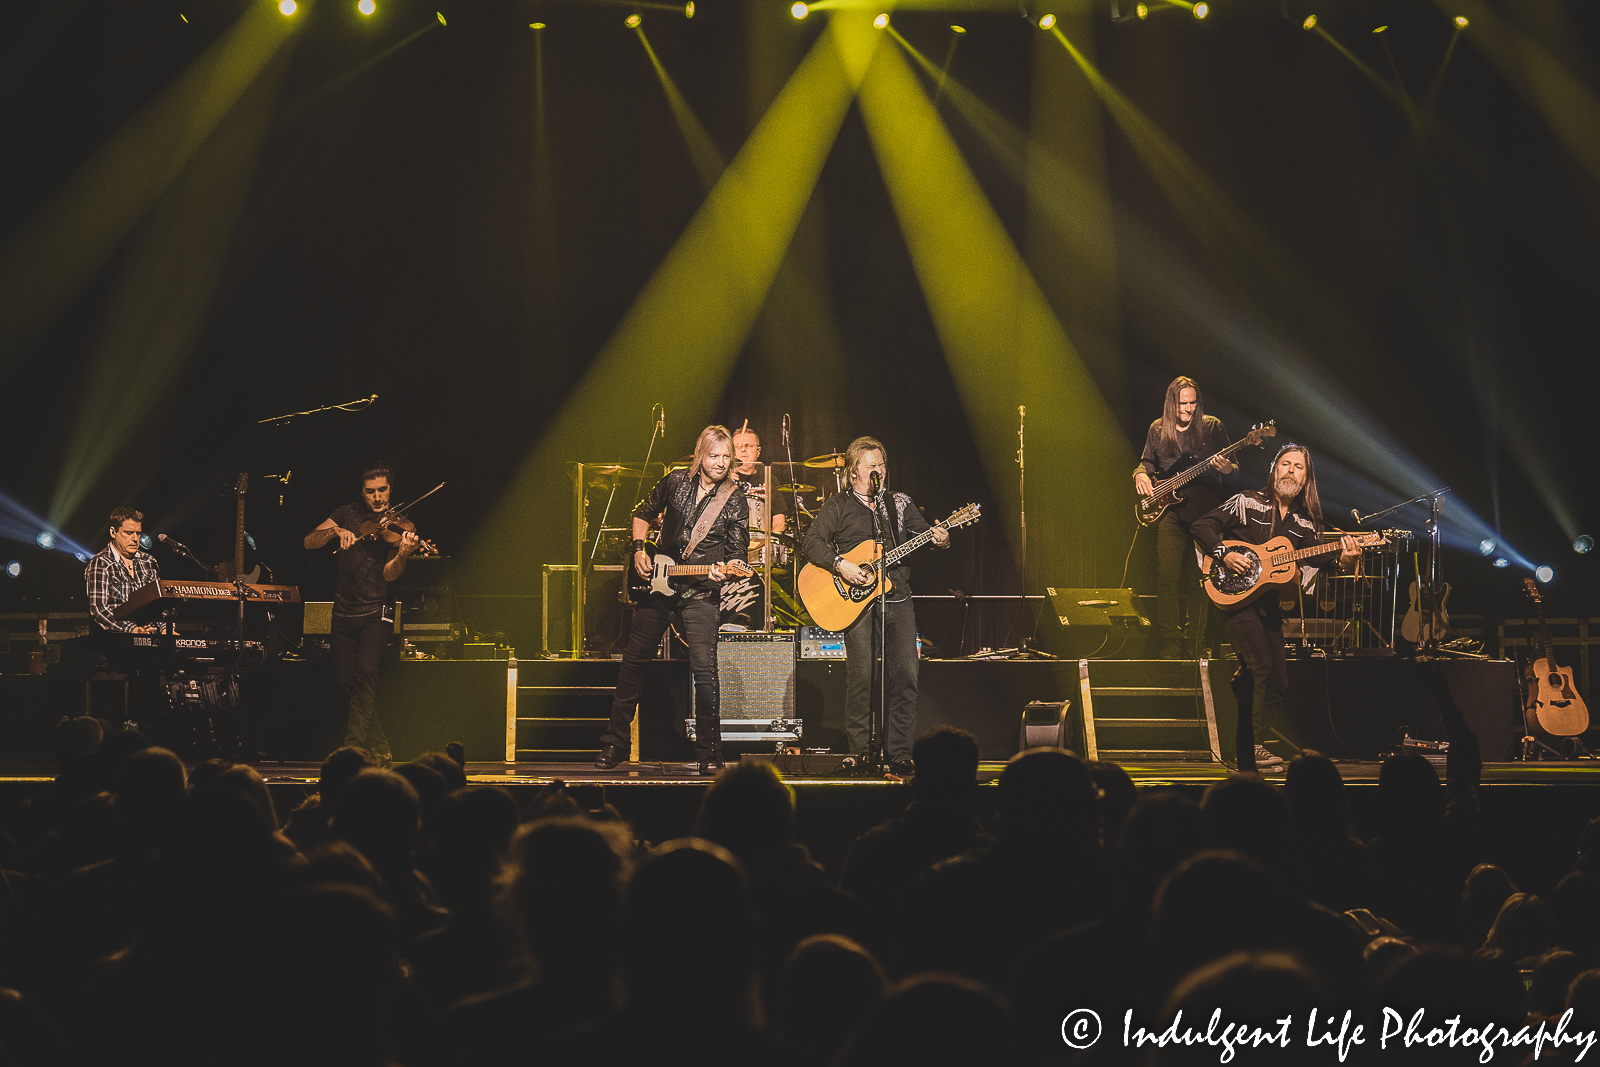 Travis Tritt jamming with his band at Star Pavilion inside of Ameristar Casino in Kansas City, MO on December 10, 2022.